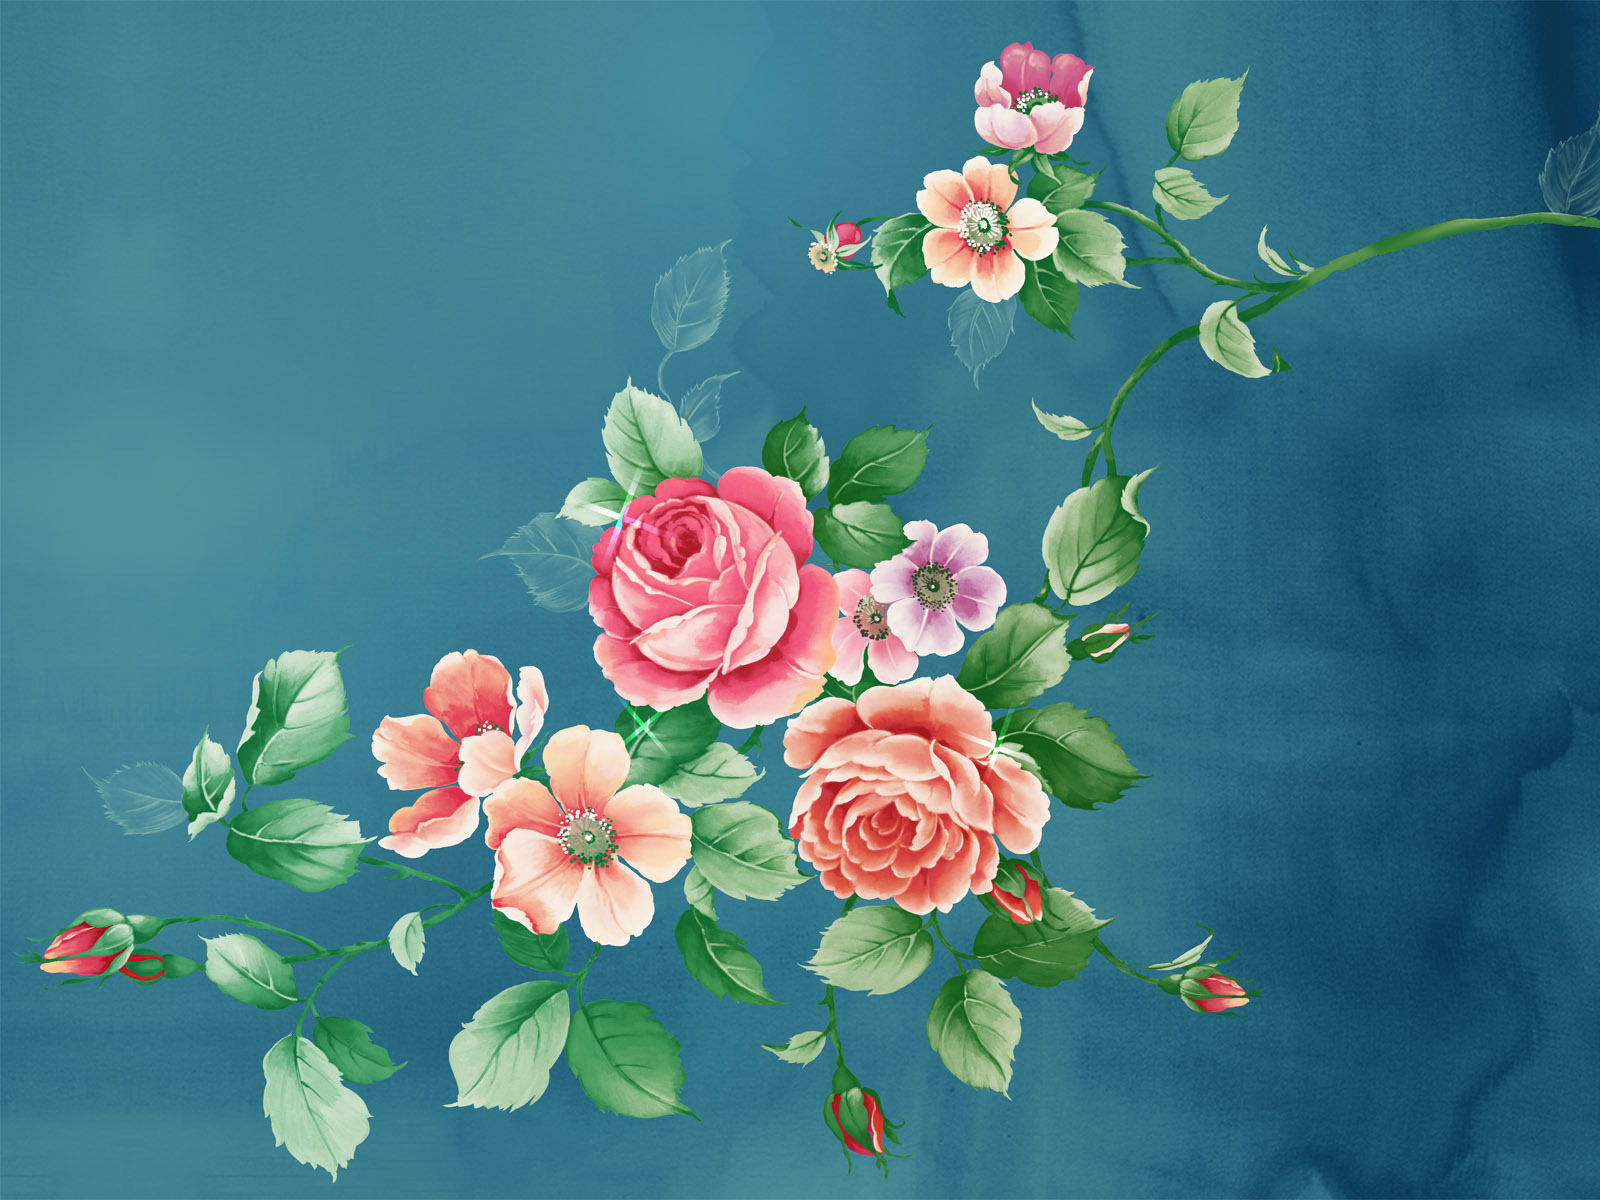 roses, plants, pictures, flowers, turquoise Aesthetic wallpaper